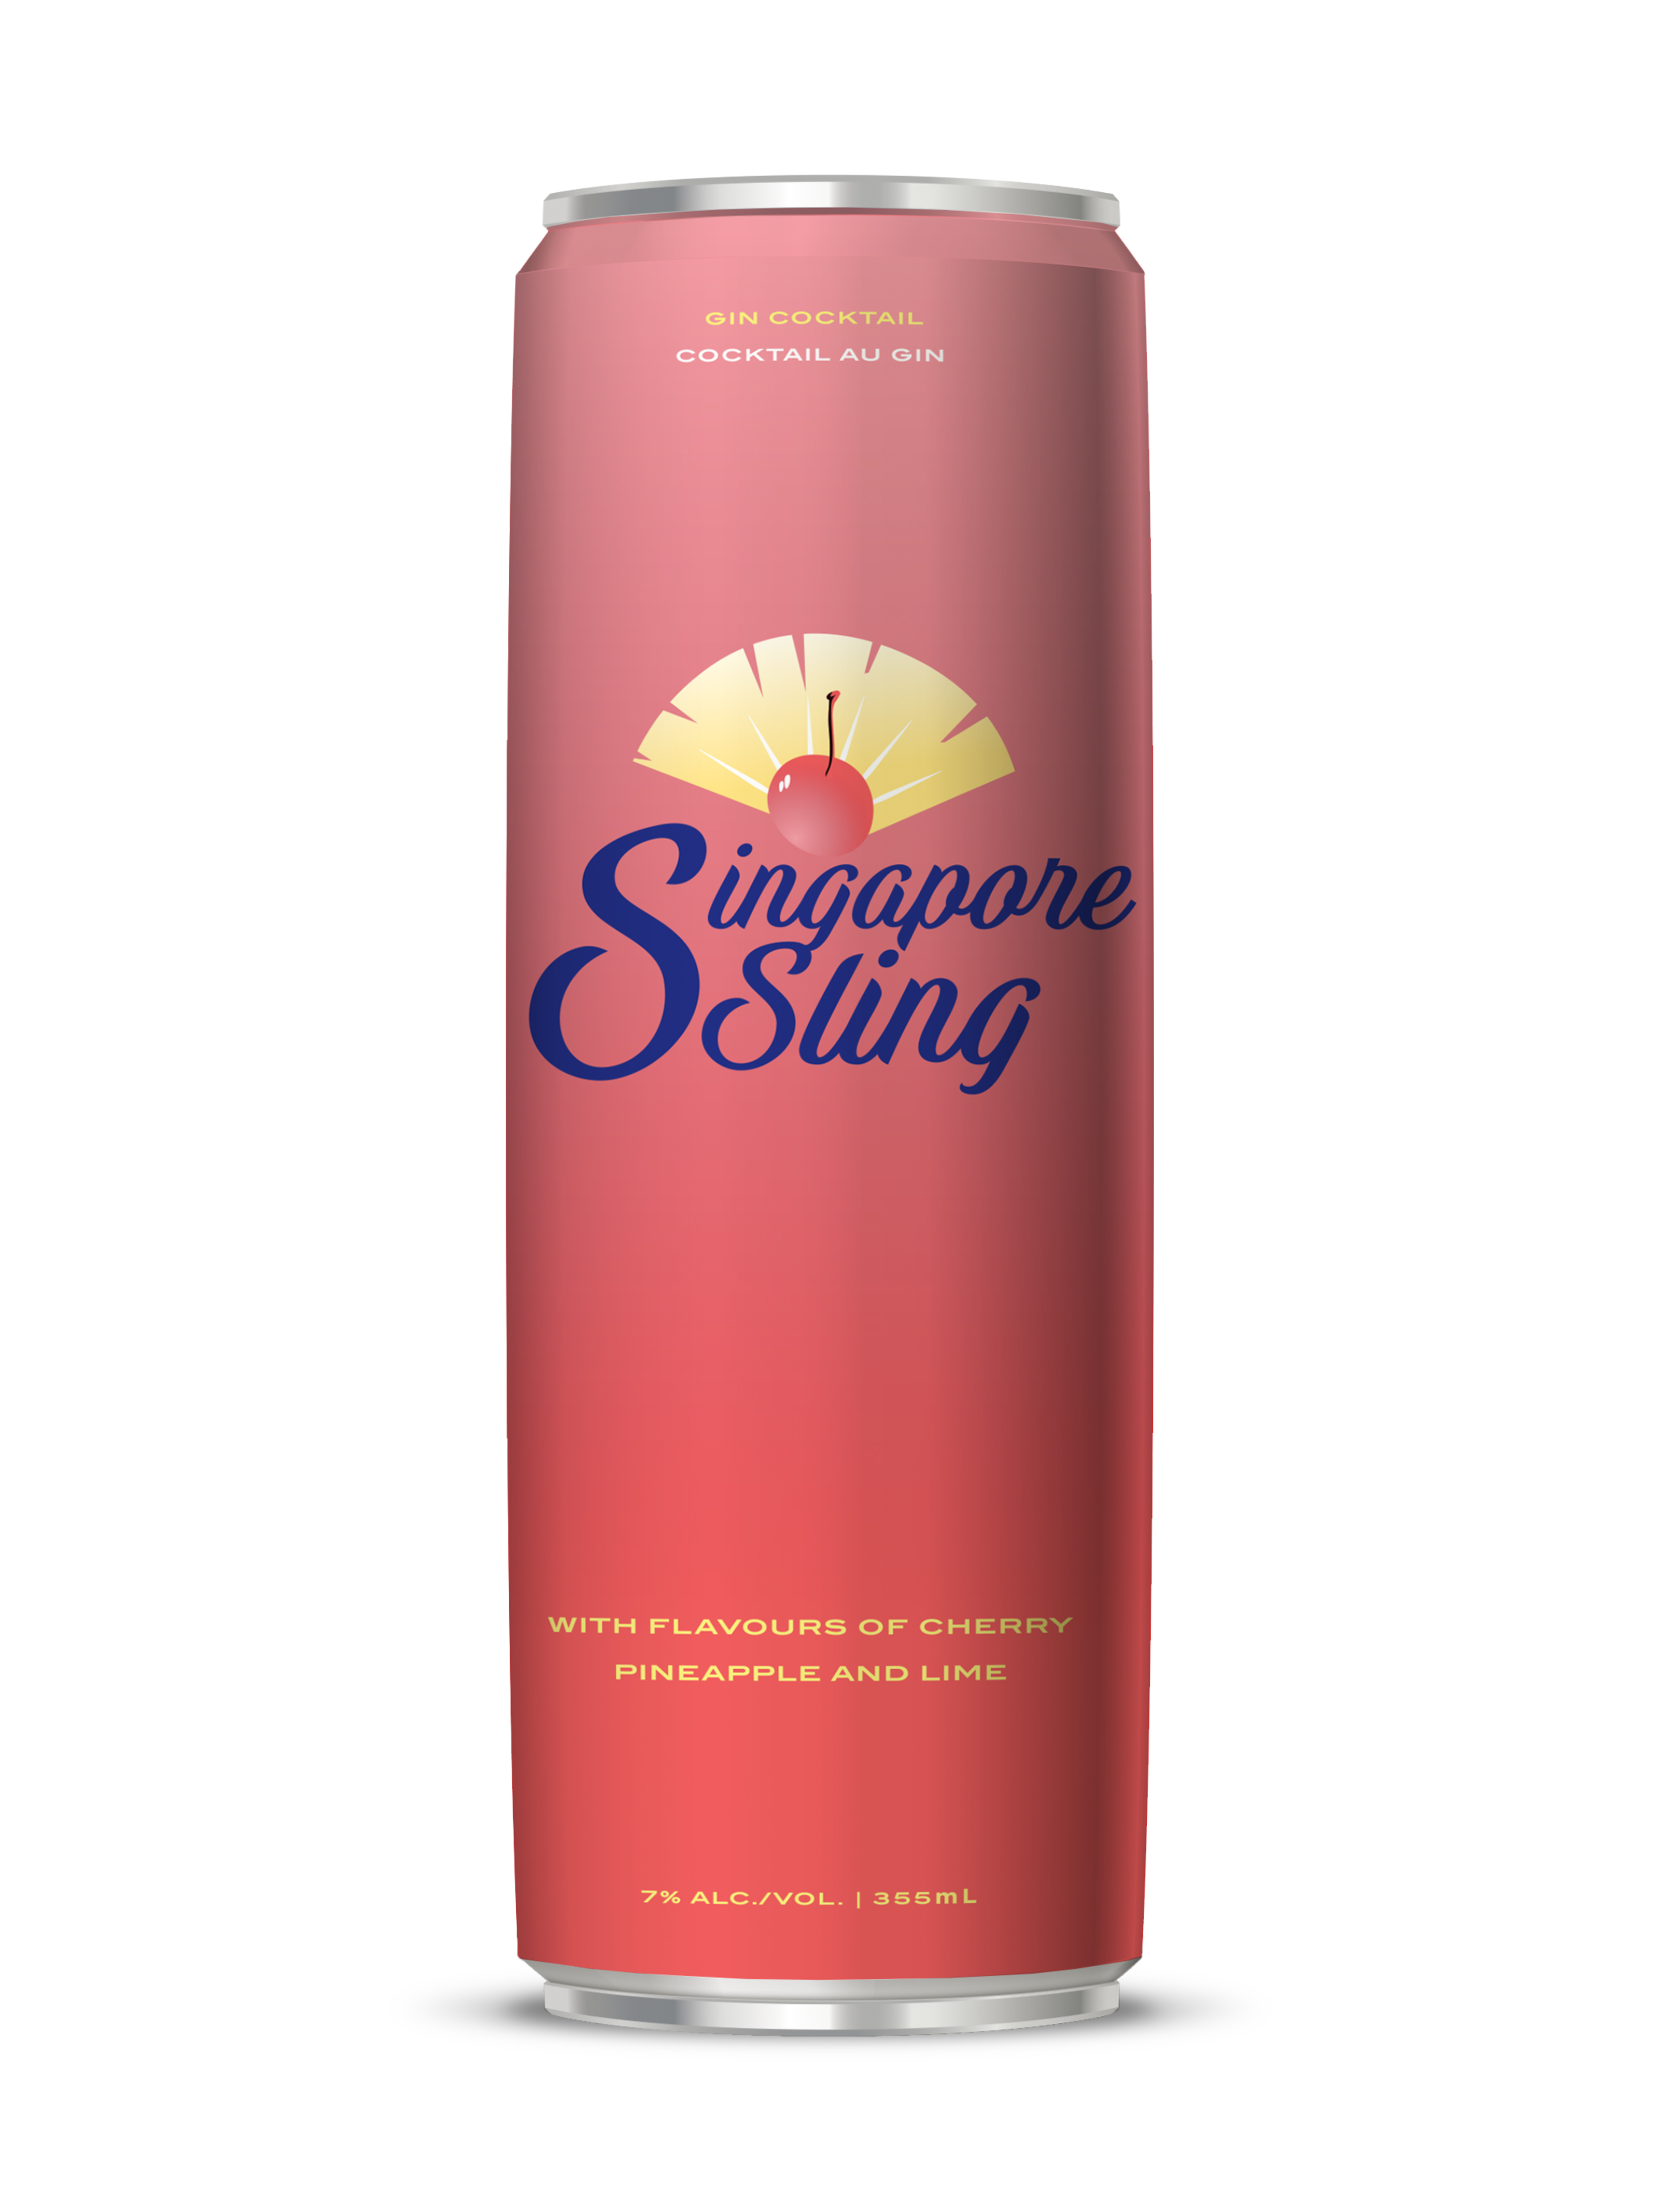 Can of Singapore Sling cocktail with cherry, pineapple, and lime flavors, 7% alcohol volume